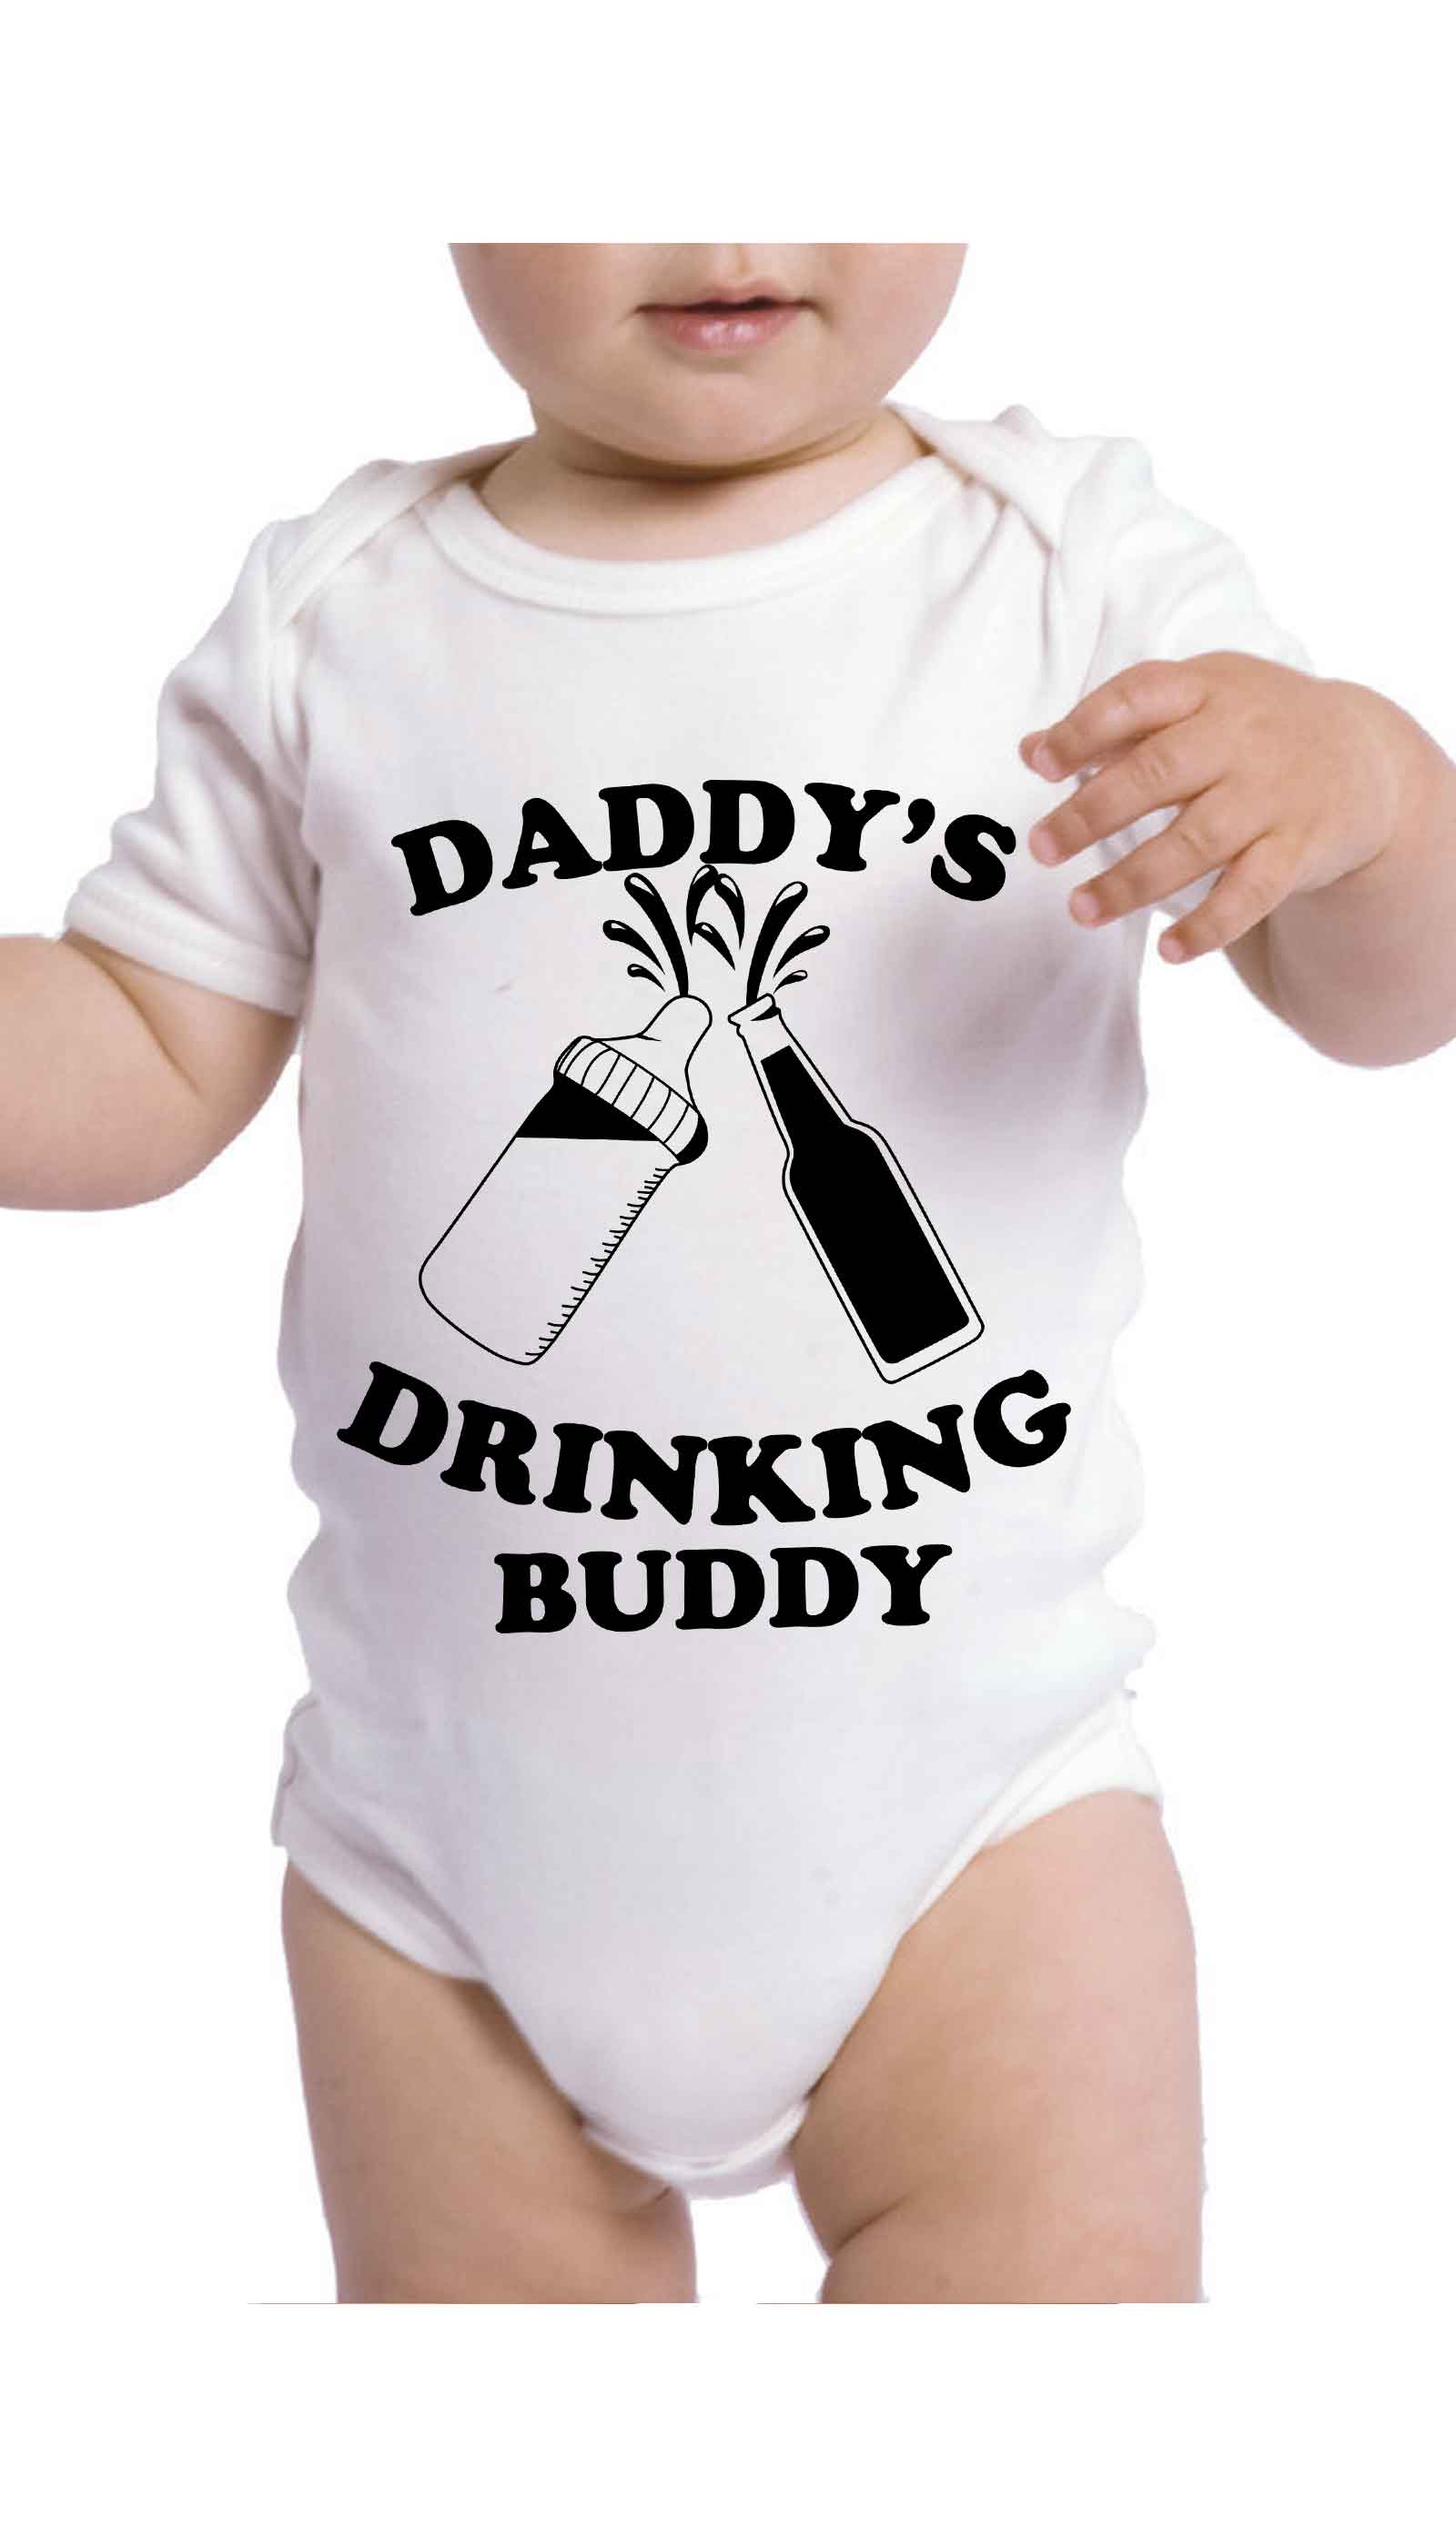 Daddy's Drinking Buddy Funny Baby Infant Onesie